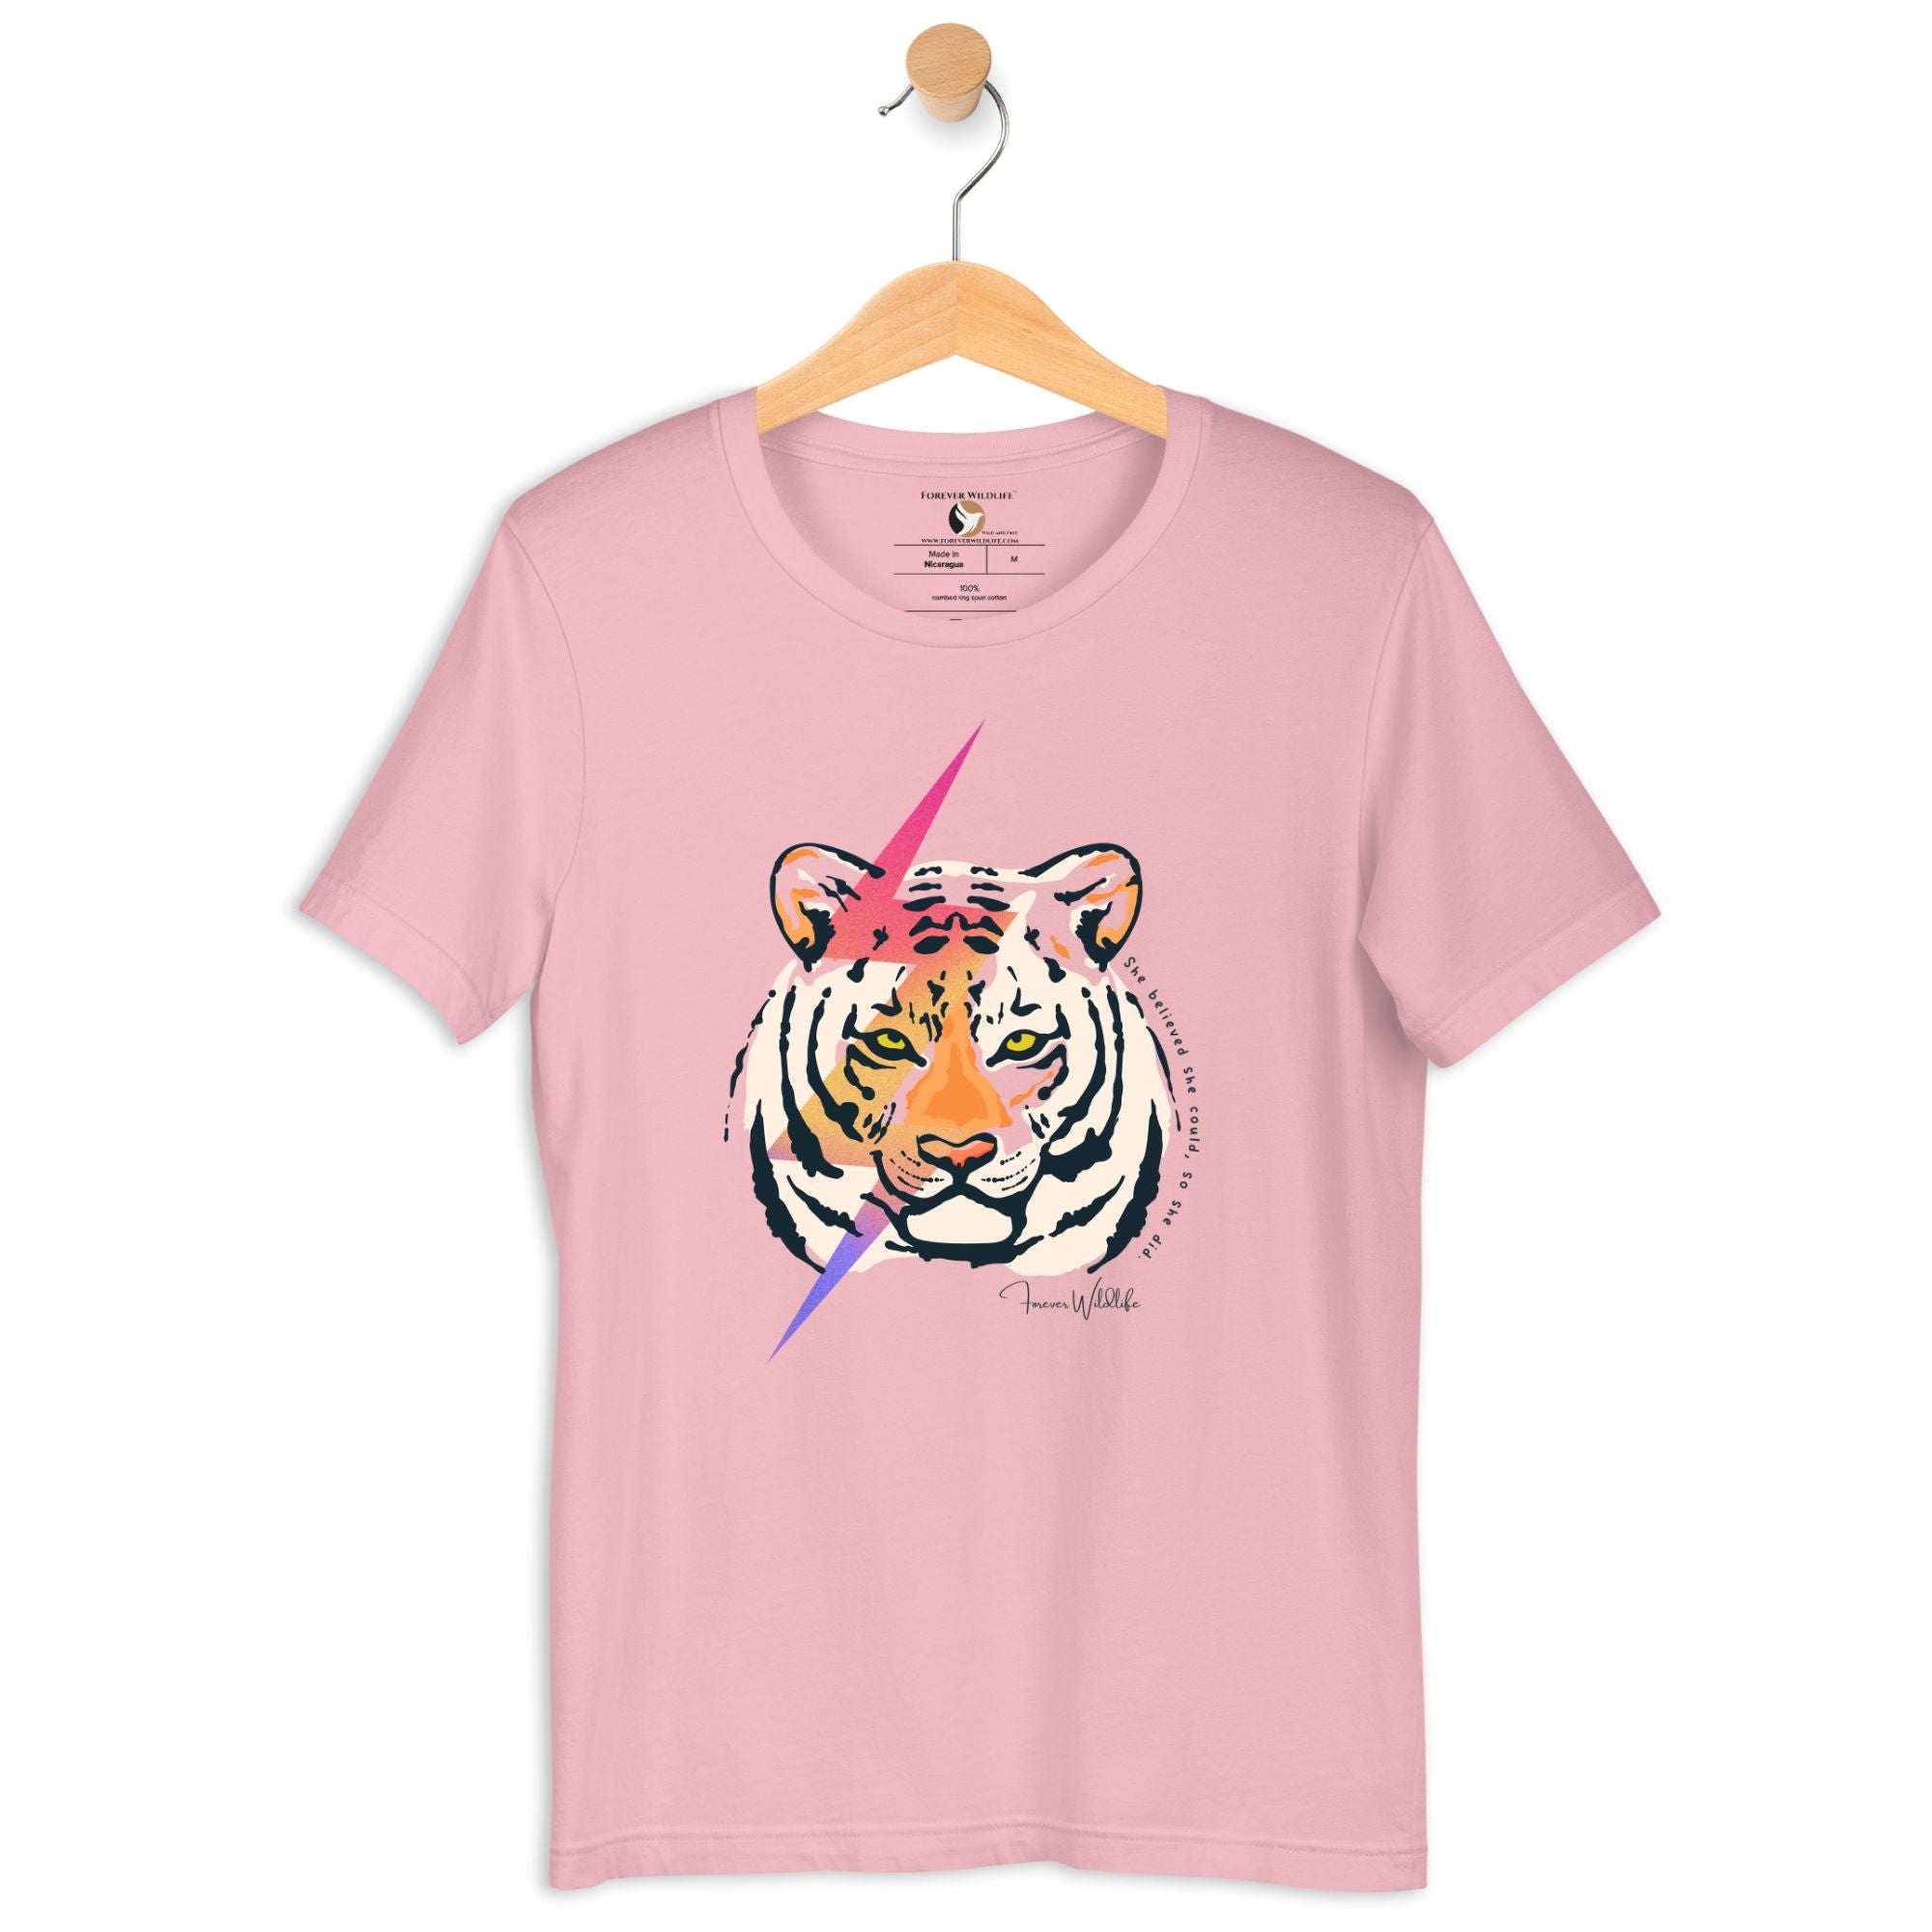 Tiger T-Shirt in Pink – Premium Wildlife T-Shirt Design with She Believed She Could So She Did Text, Tiger Shirts & Wildlife Clothing